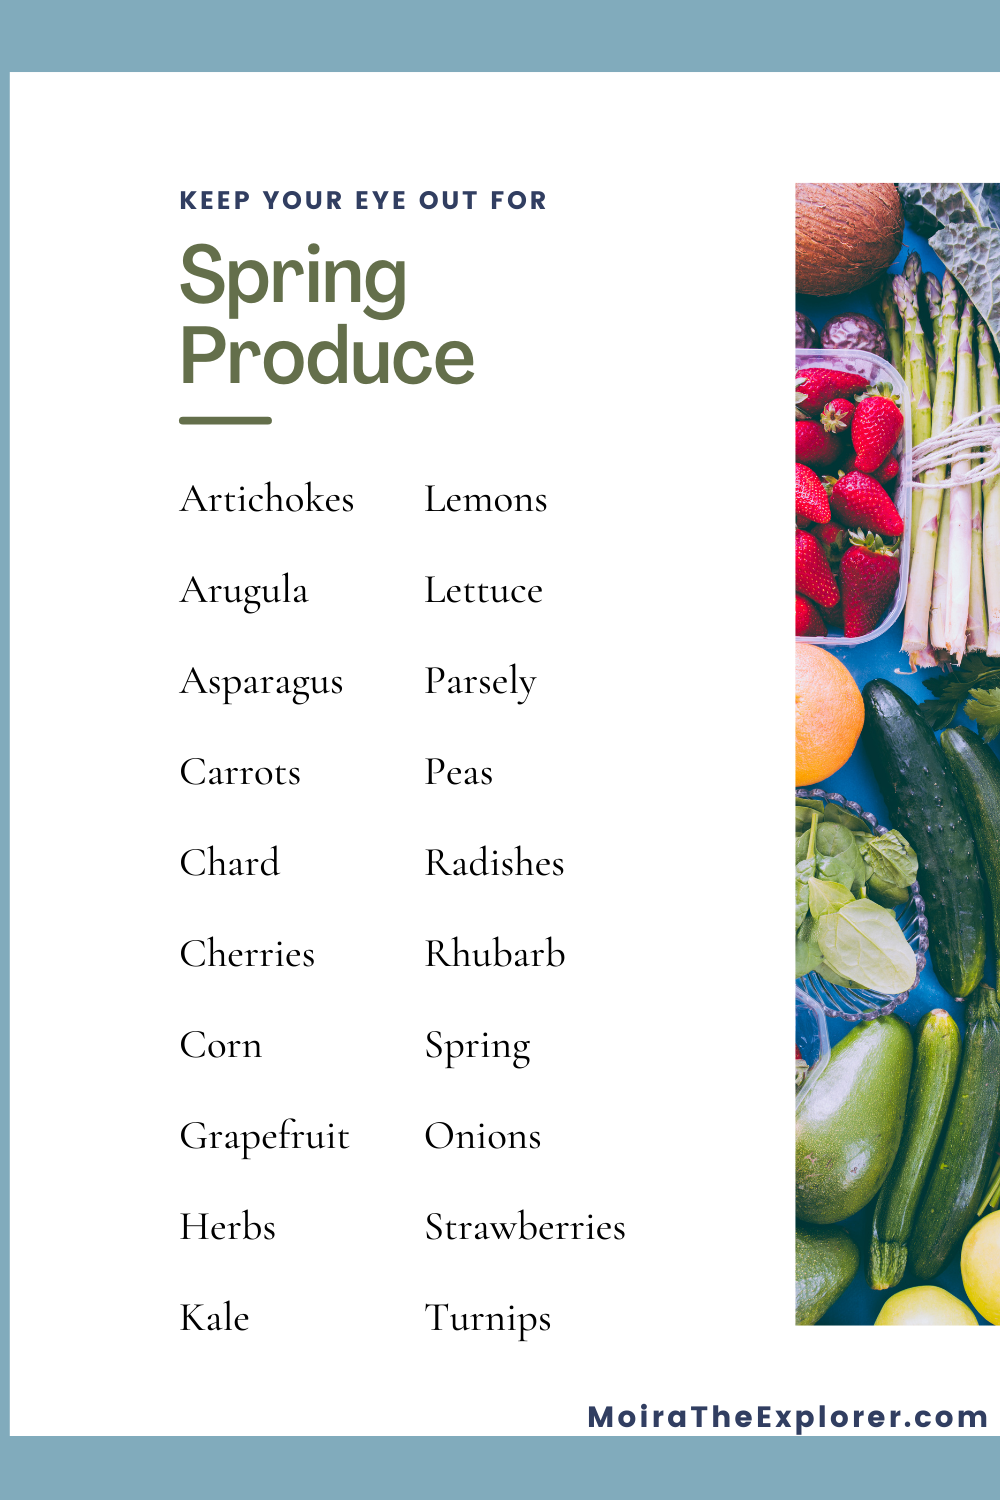 List of produce that are in season for spring: Artichokes, Arugula, Asparagus, Carrots, Chard, Cherries, Corn, Grapefruit, Herbs, Kale, Lemons, Lettuce, Parsely, Peas, Radishes, Rhubarb, Spring Onions, Strawberries, and Turnips,